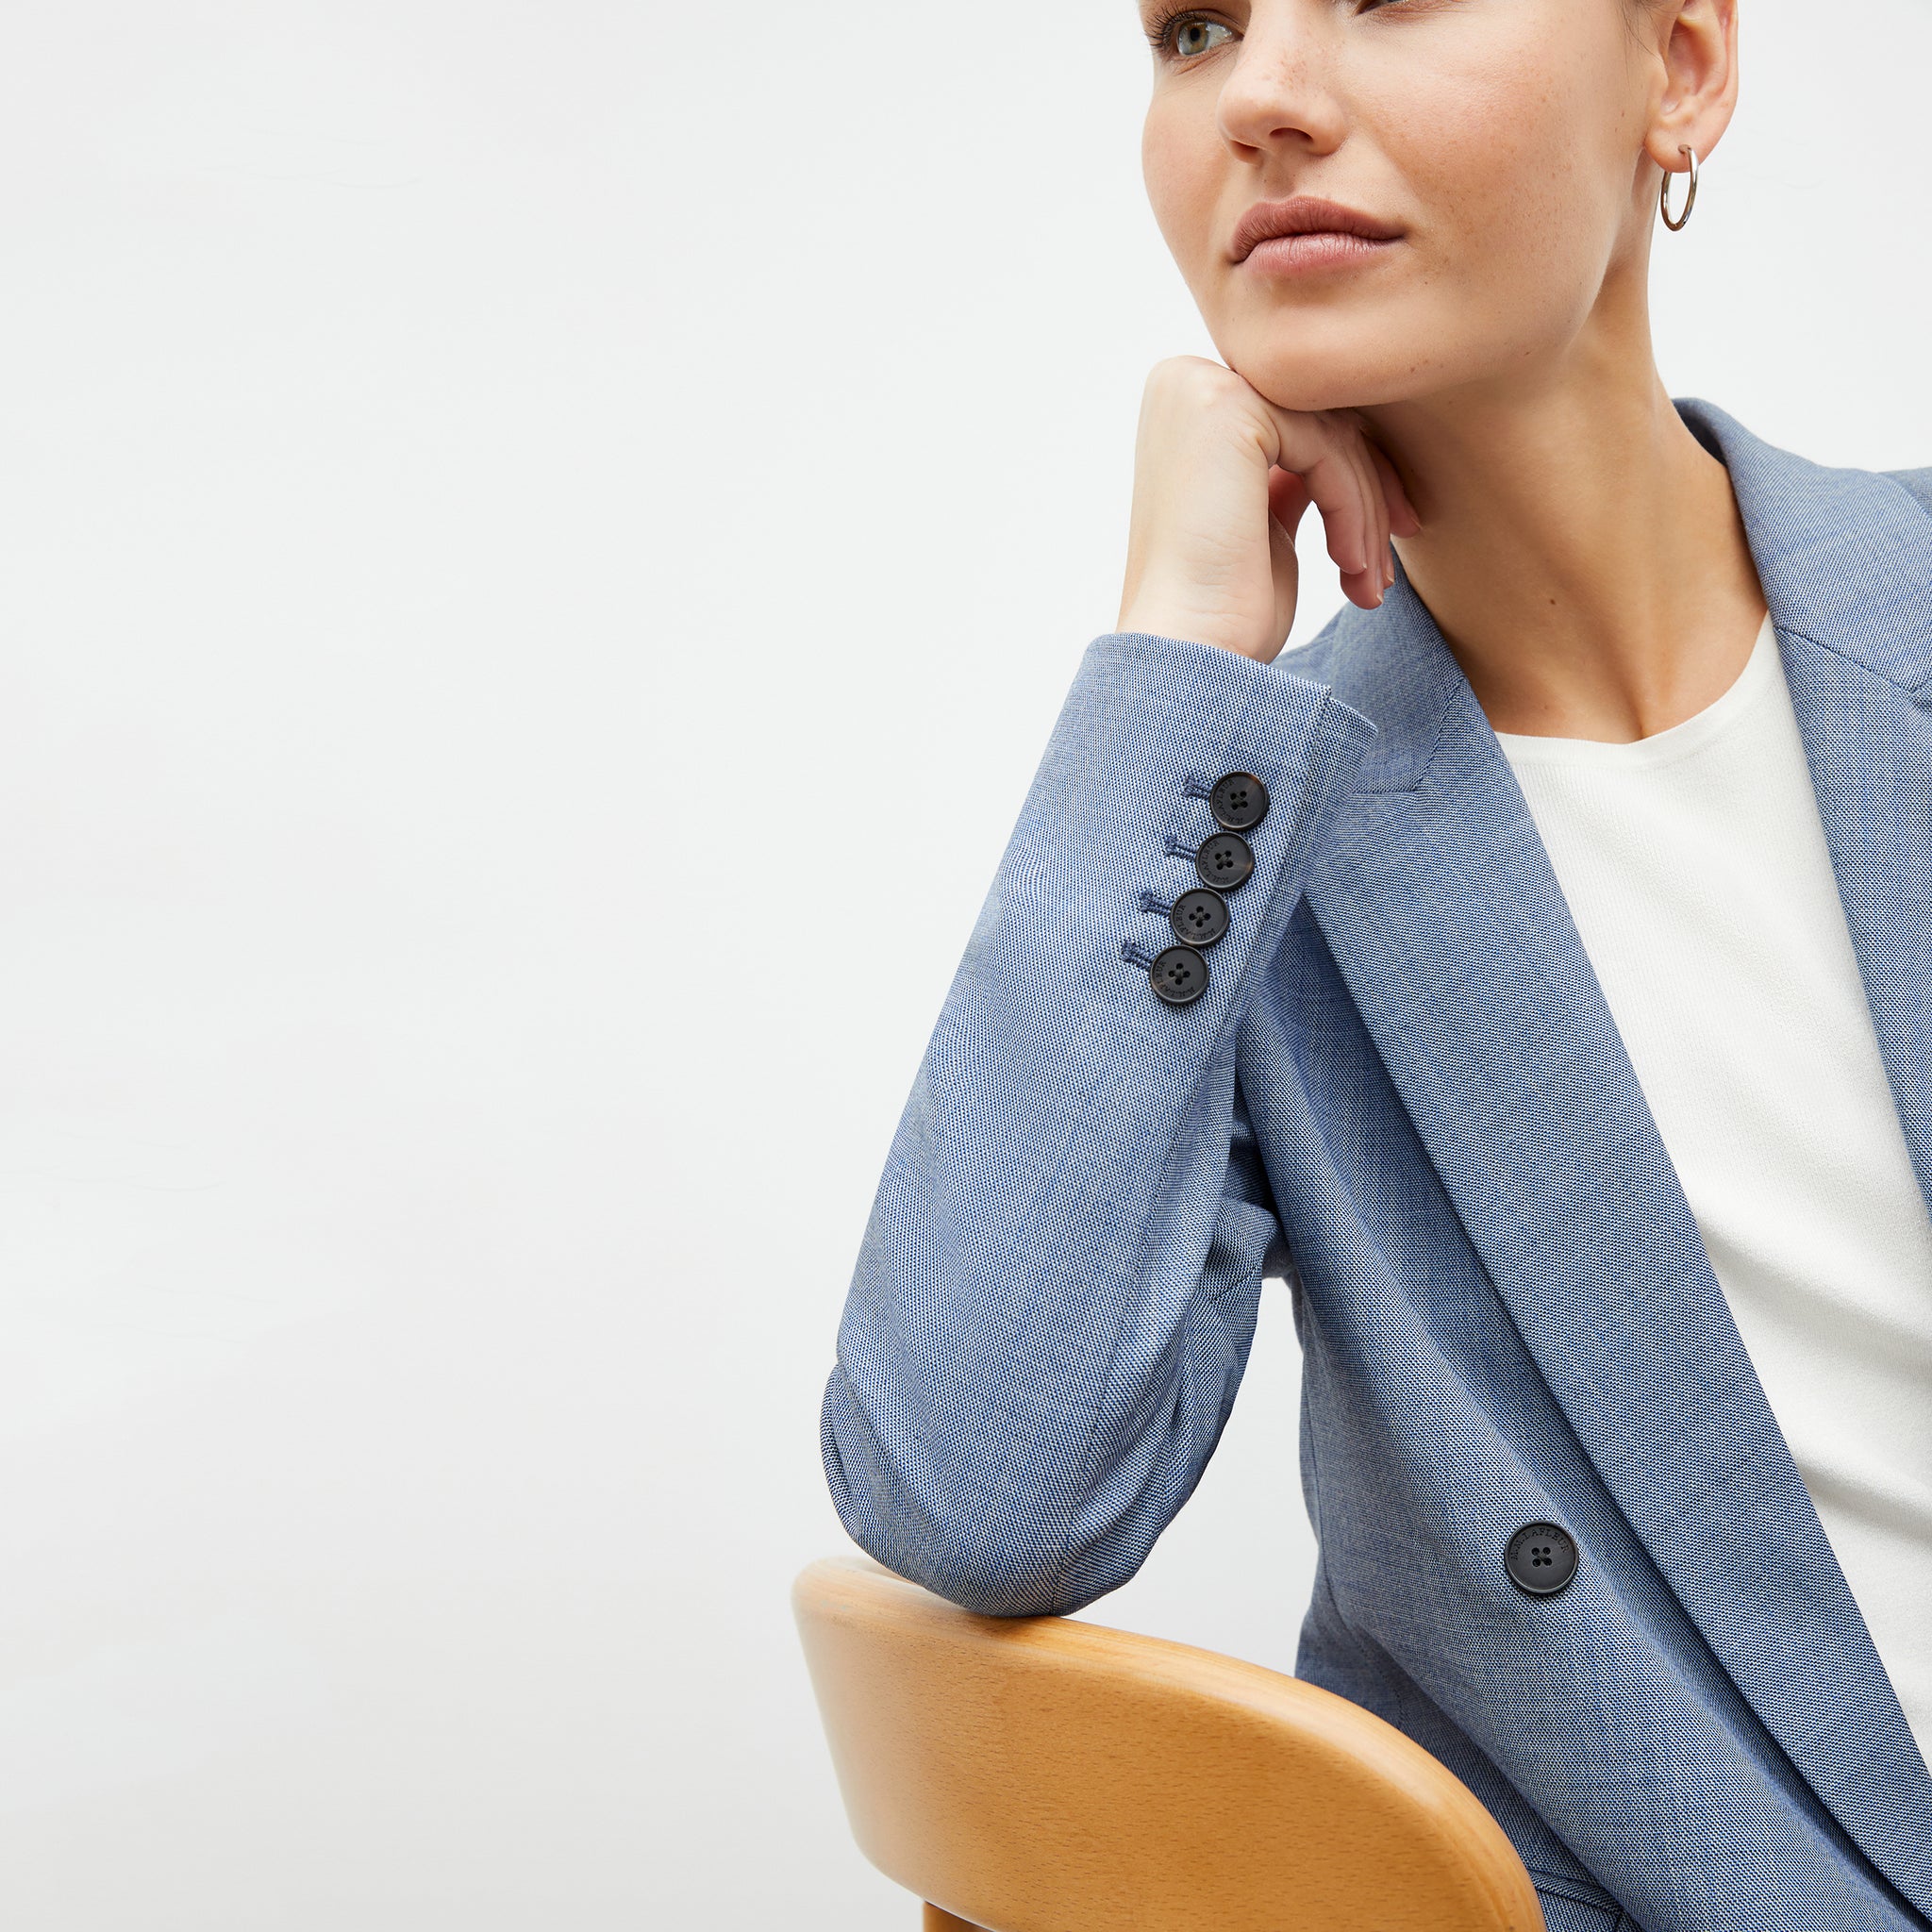 Front image of a woman wearing the ohara blazer in indigo and white